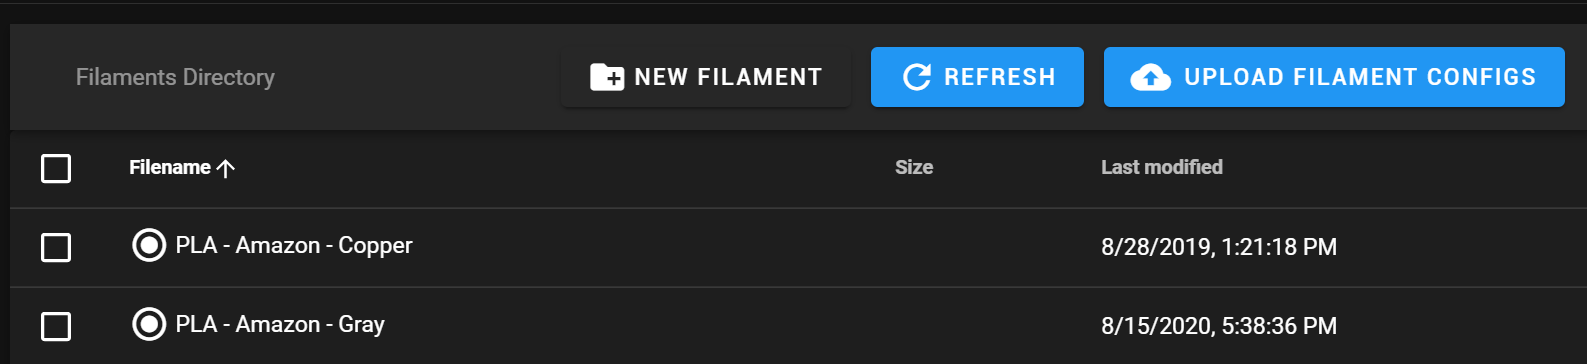 Add Filament Button.png